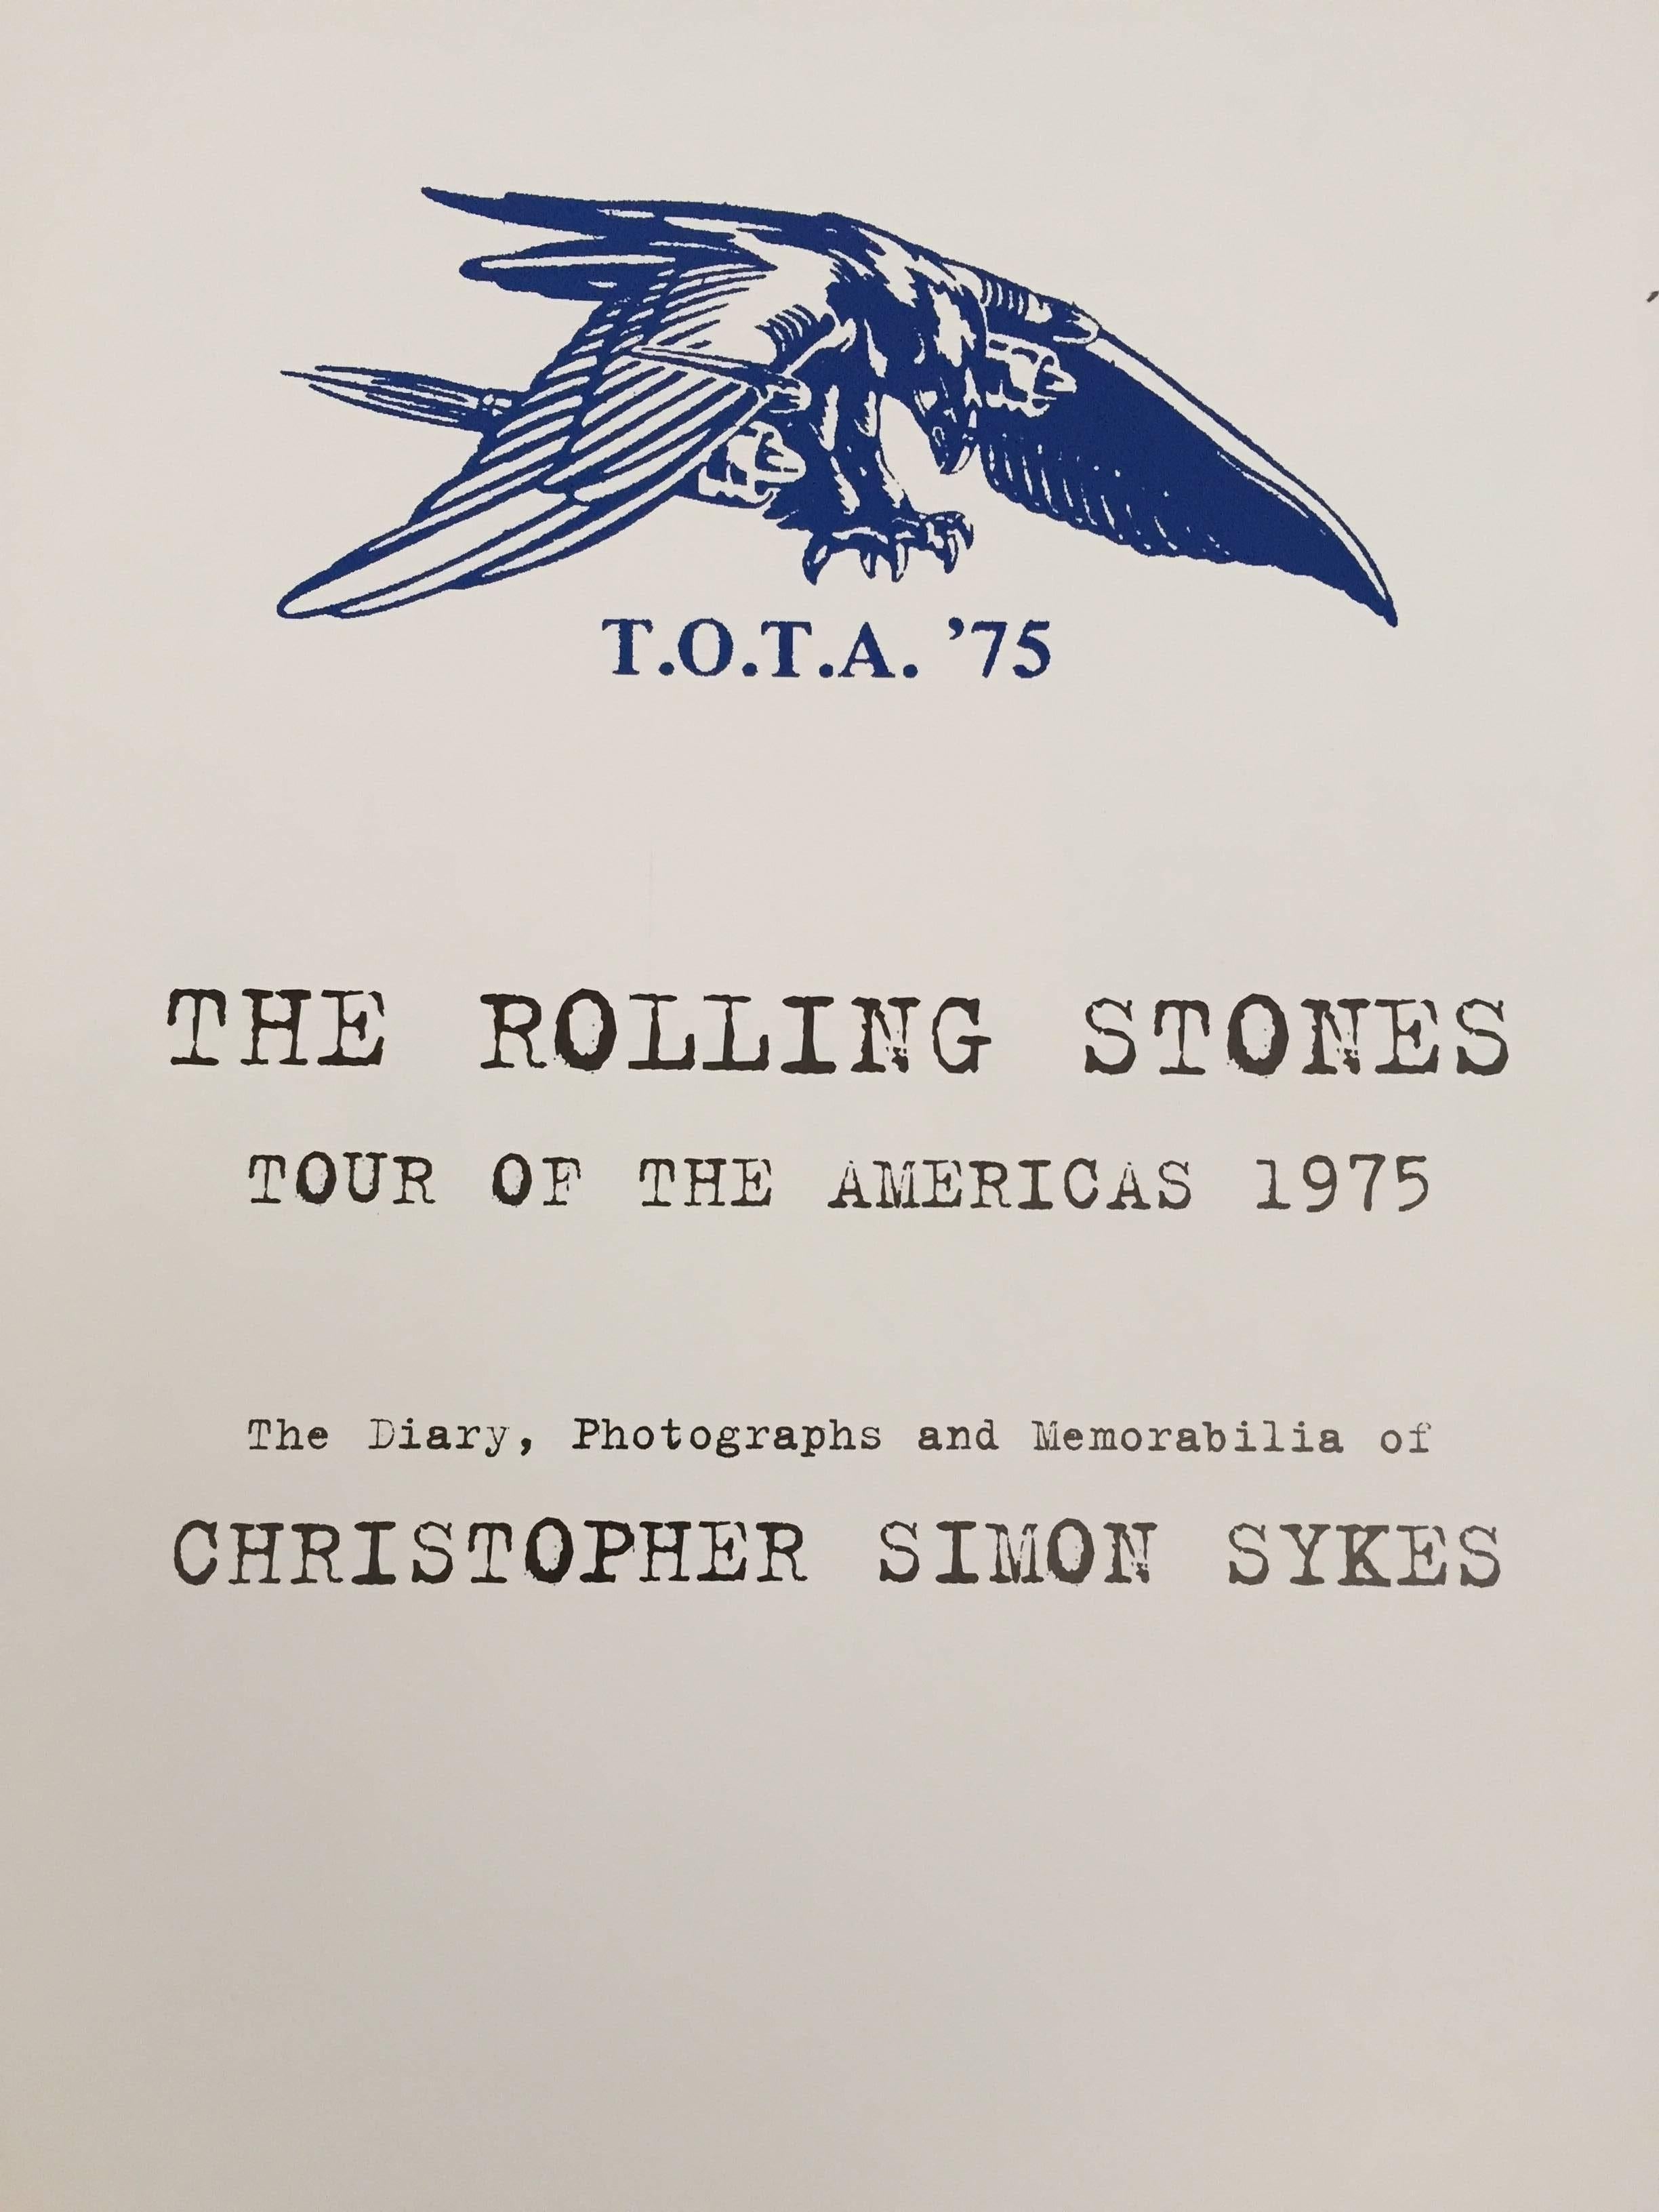 The Rolling Stones, Tour of the Americas 75 The Collector Edition.
T.O.T.A. '75 - The Official Limited Edition. Large Heavy Collector table book.
The Diary, Photographs and Memorabilia of Christopher Simon Sykes.
Over 600 rare photographs,